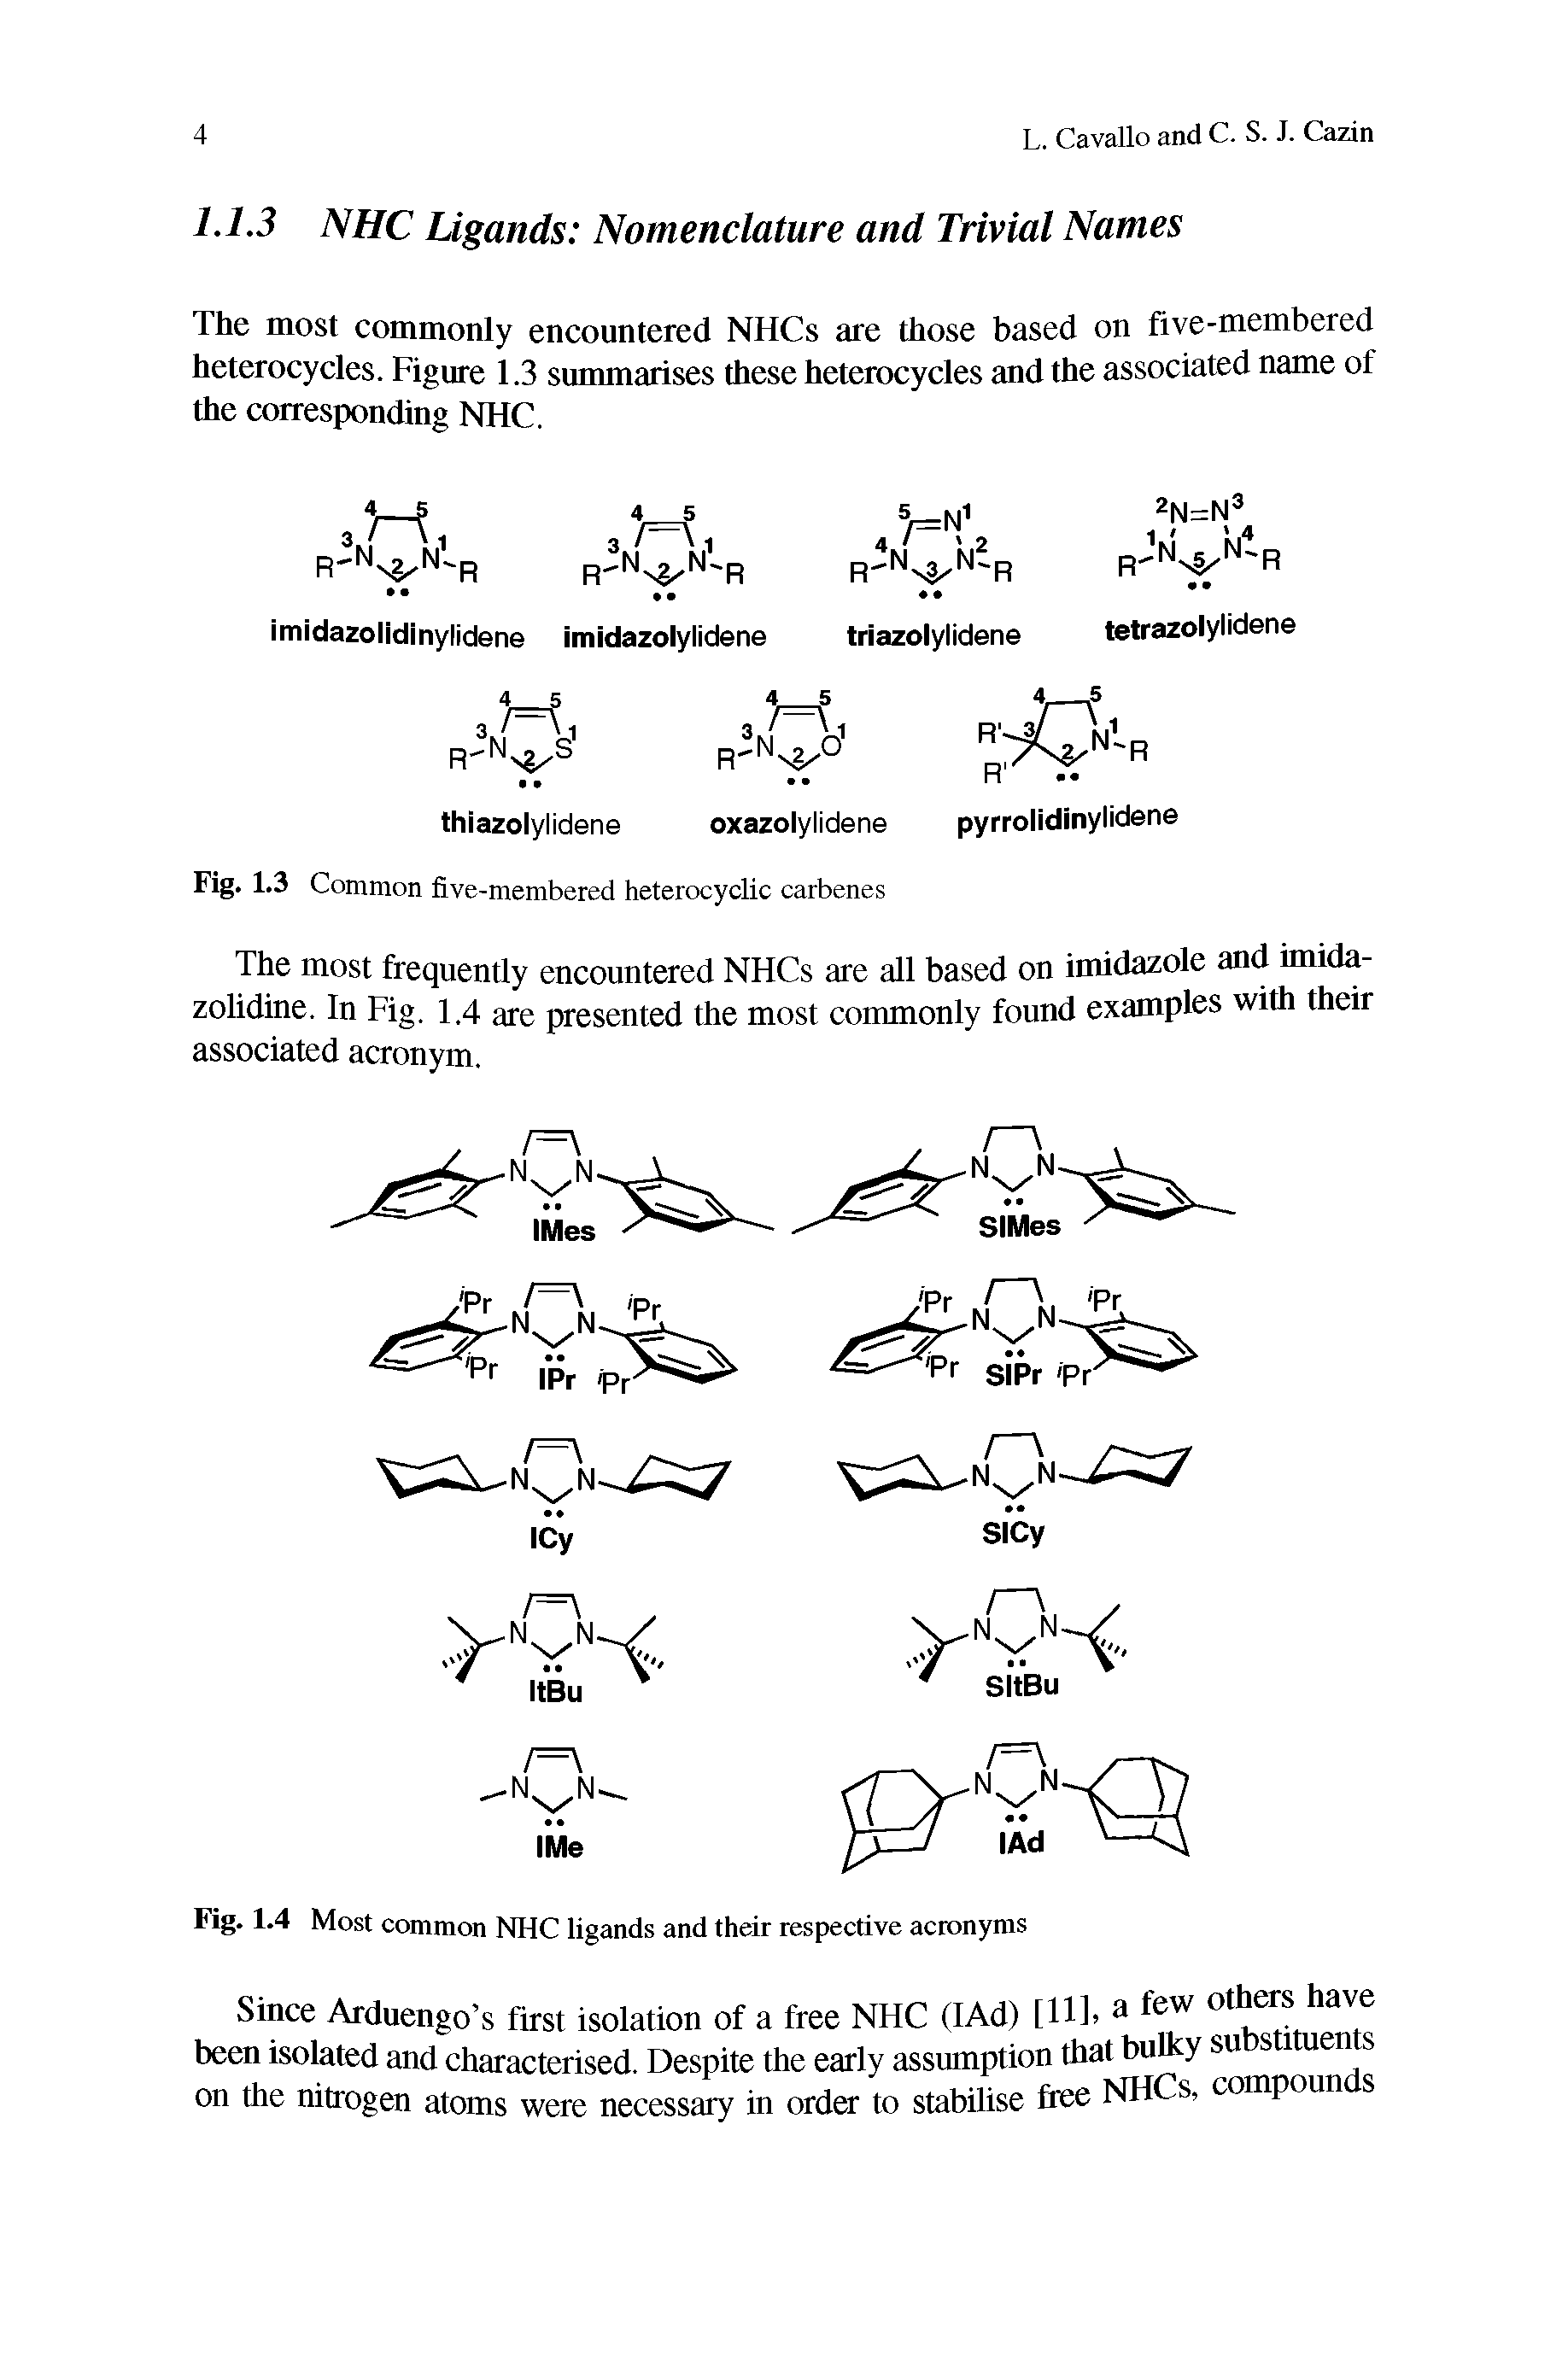 Fig. 1.4 Most common NHC ligands and their respective acronyms...